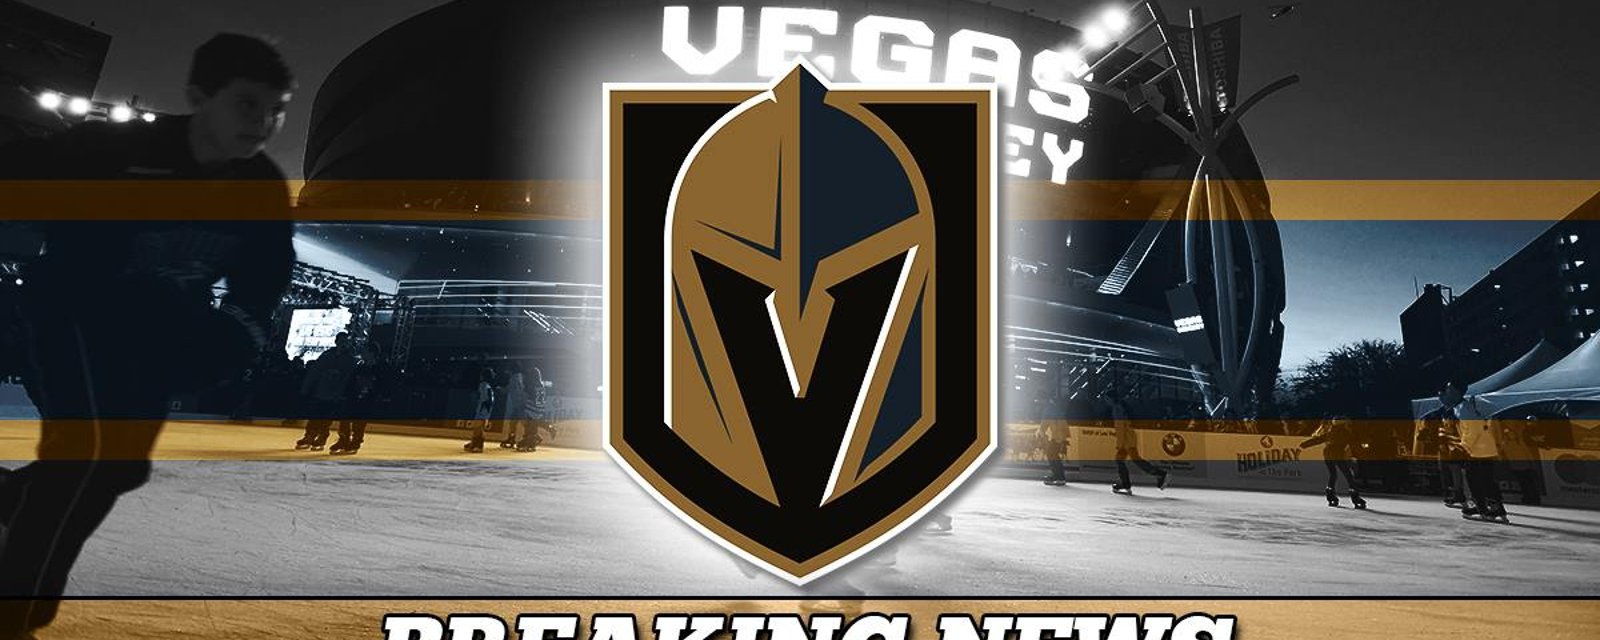 Vegas expected to take 30 goal scorer after team leaves him exposed. 